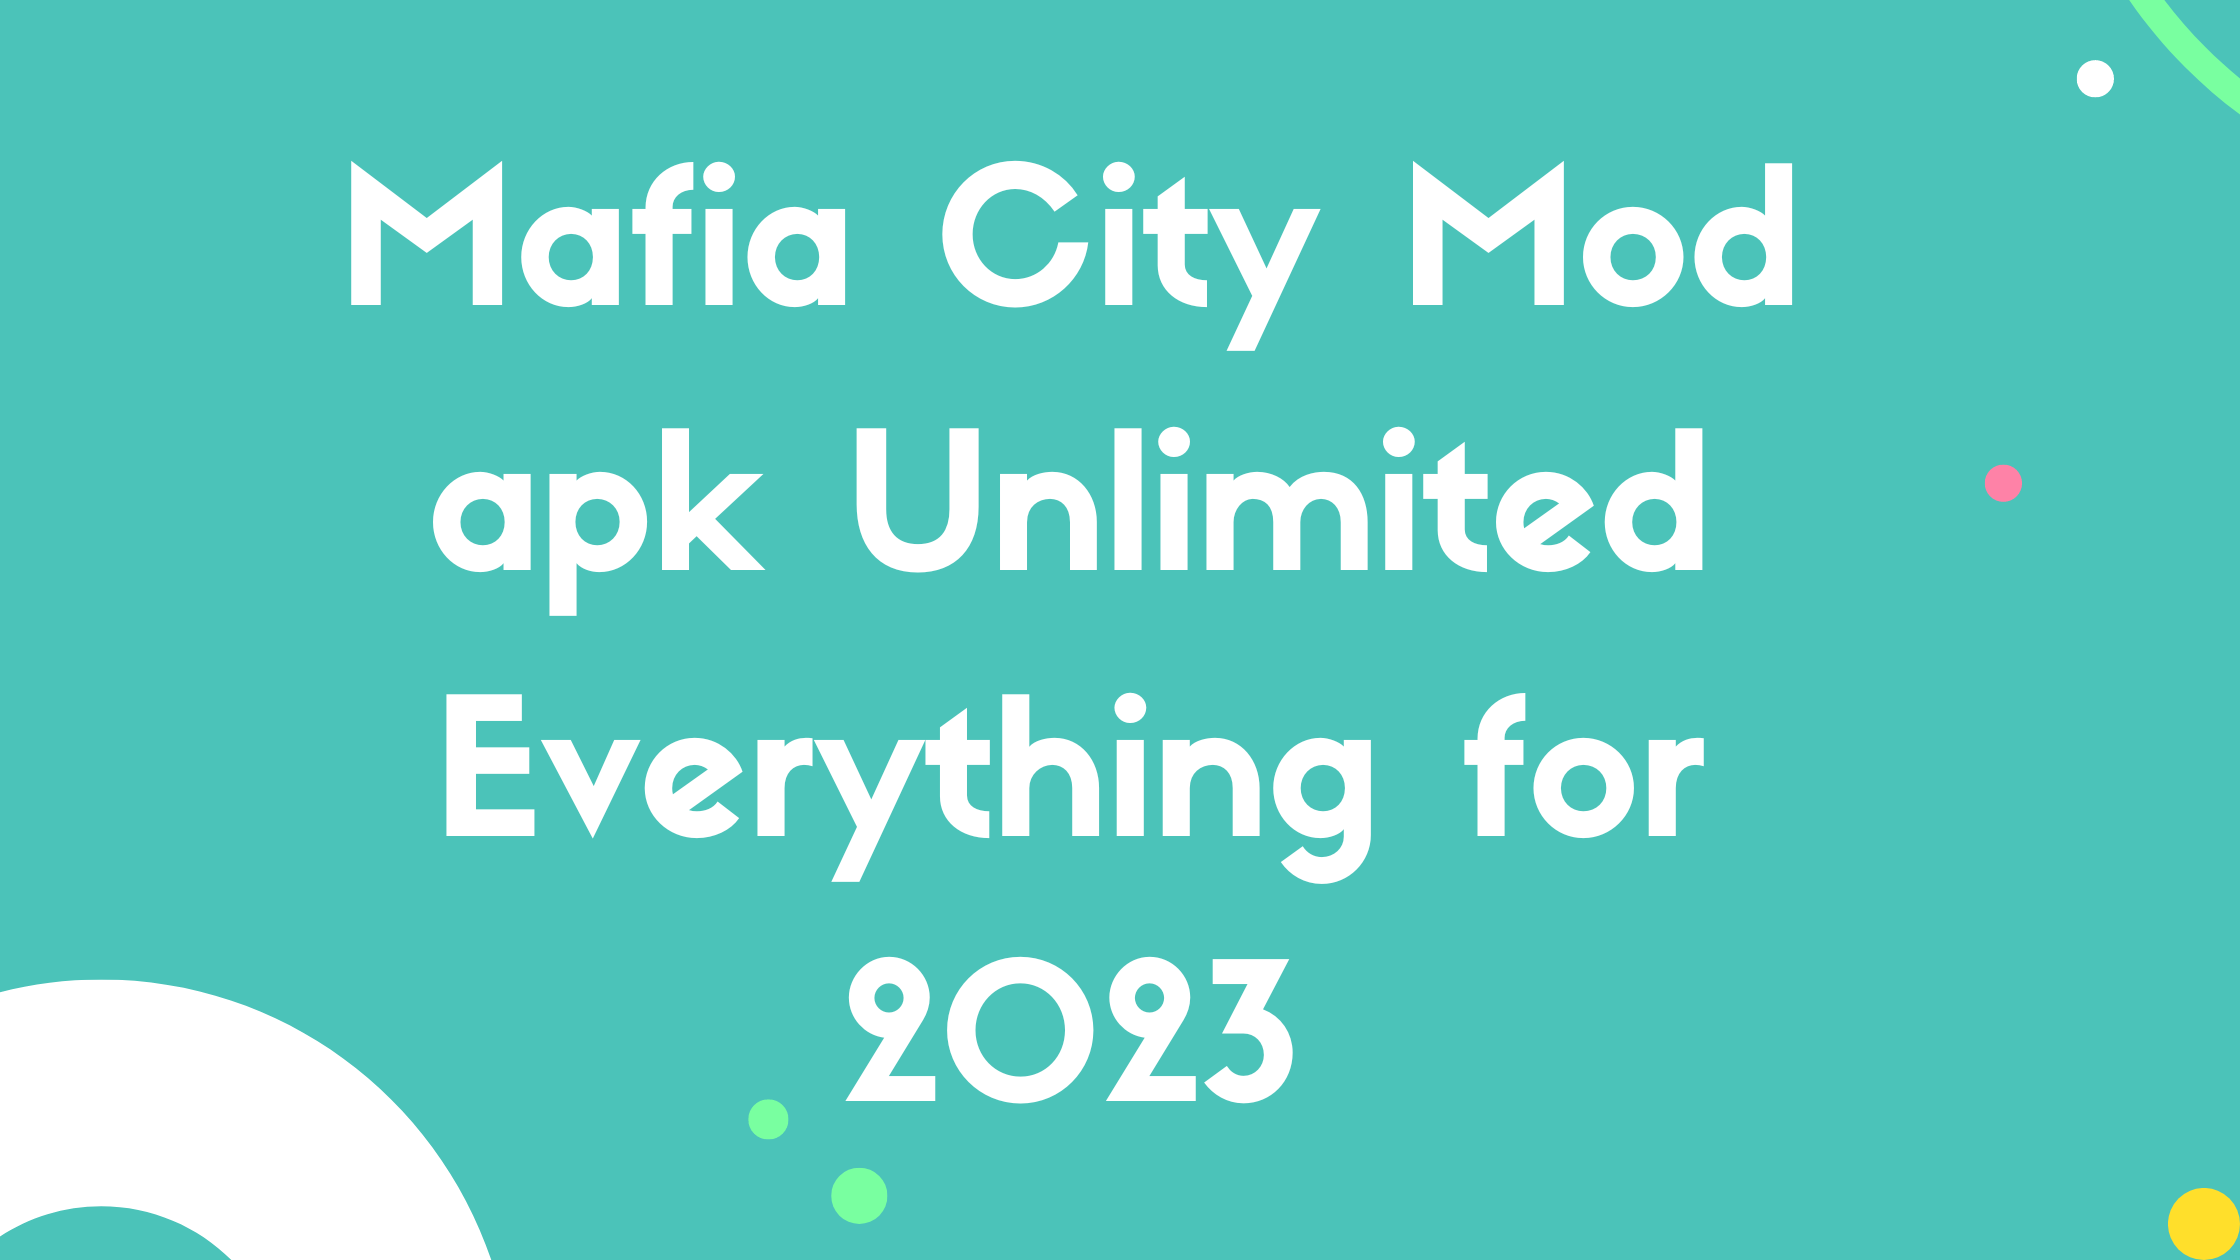 Mafia City Mod apk Unlimited Everything for 2023